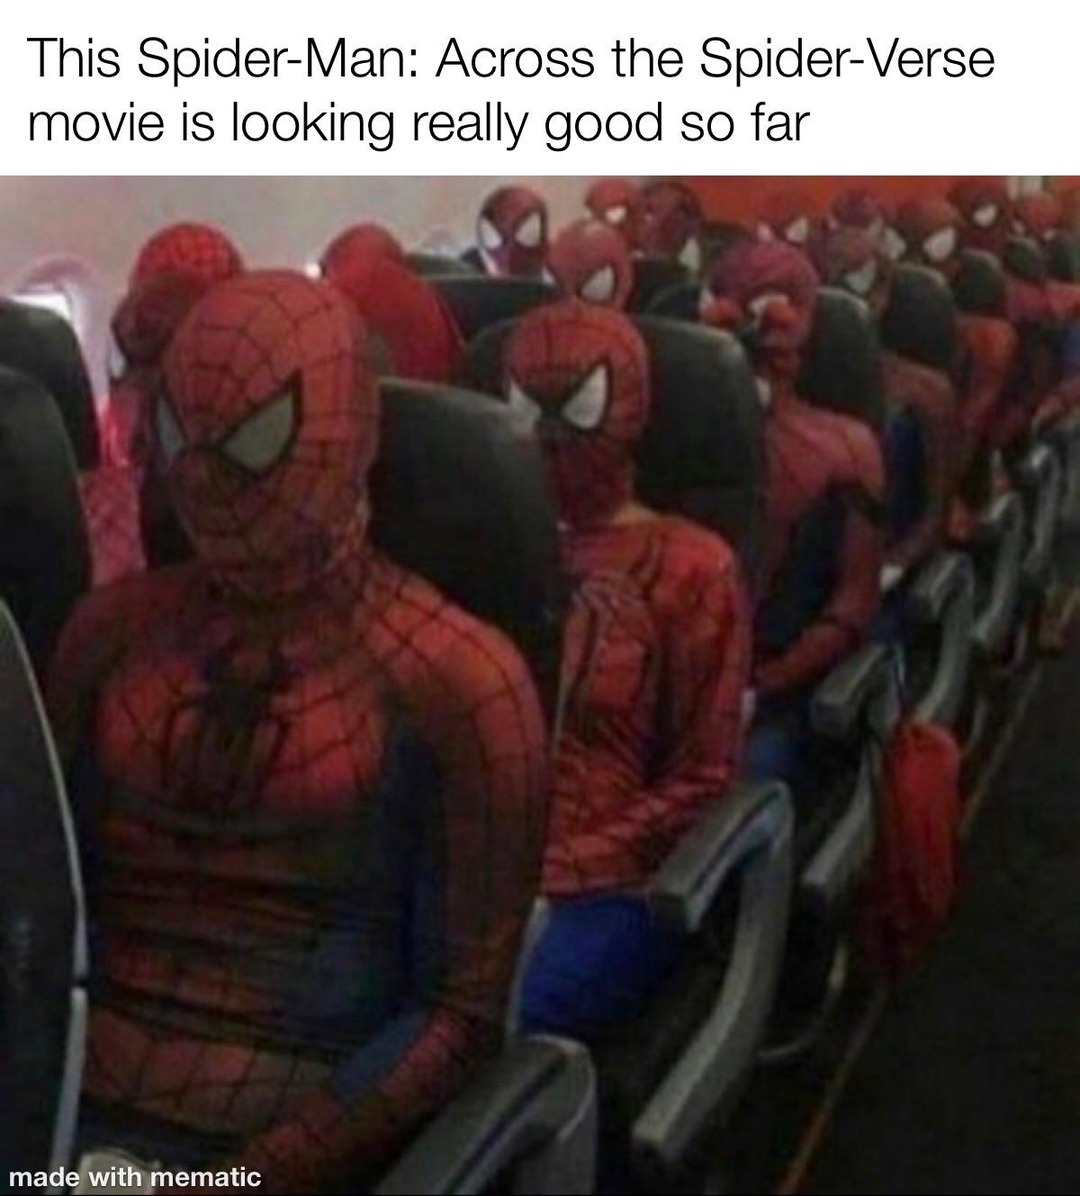 Me and the boys waiting for Spiderman across the Spider-verse - meme